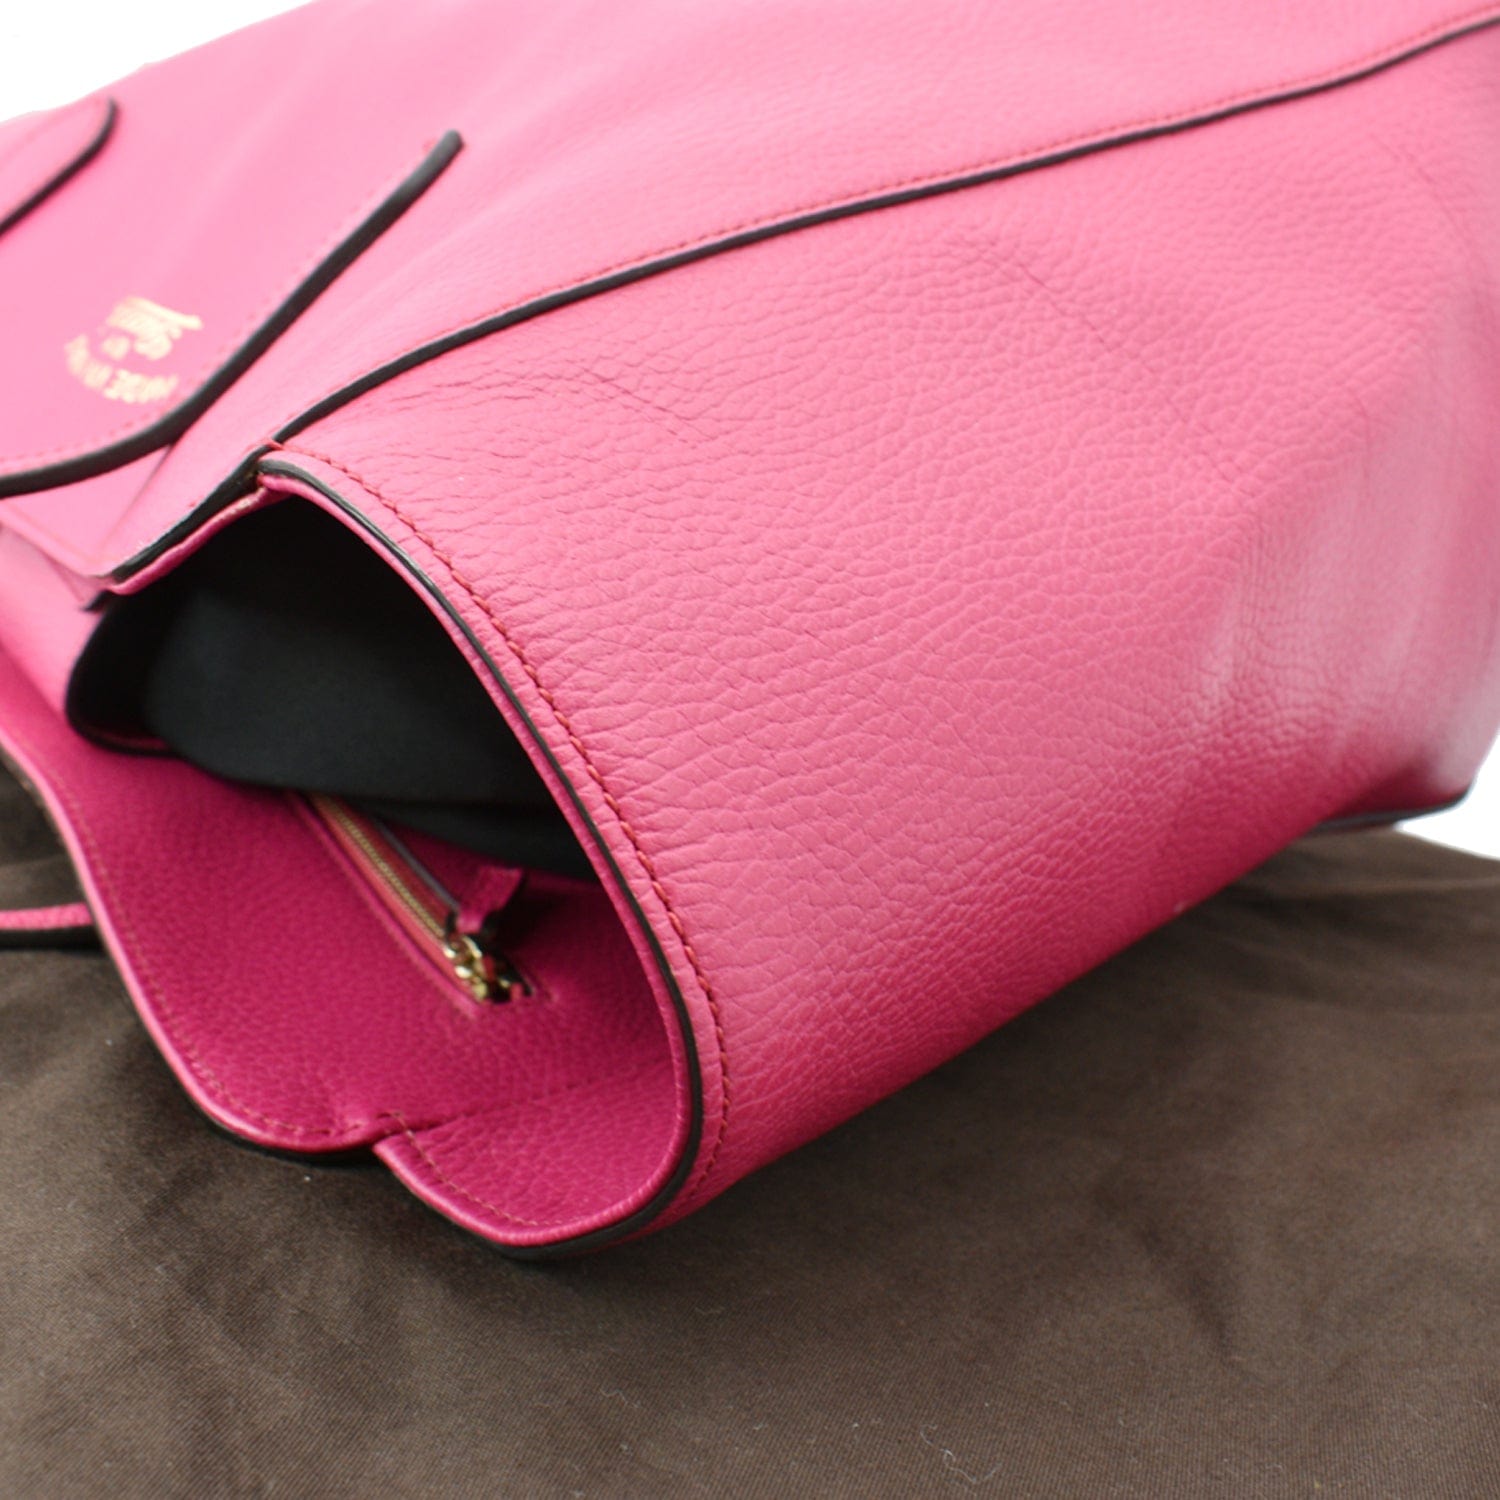 Gucci Signature Leather Tote in Pink